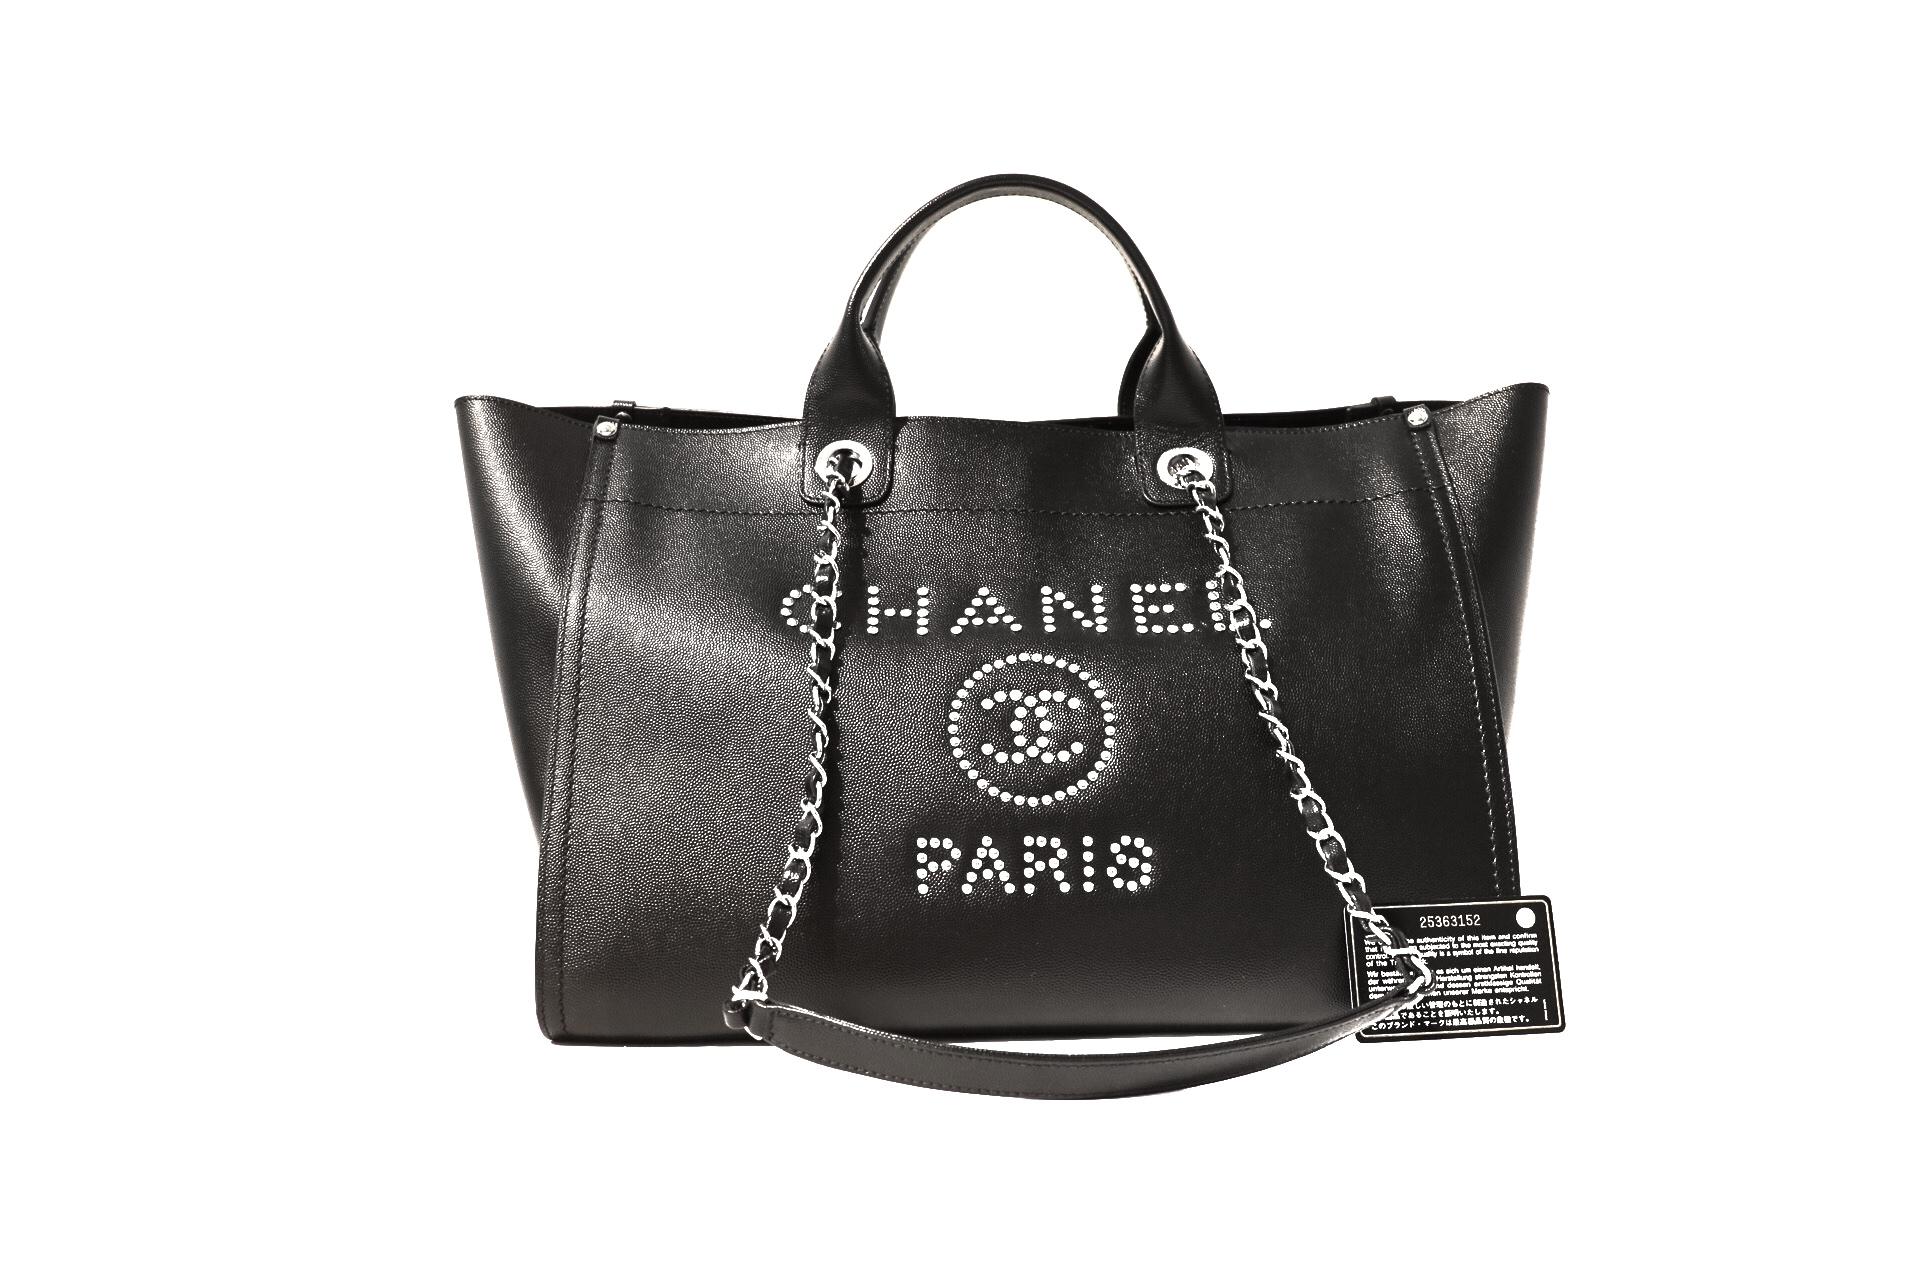 Chanel Black Leather Runway Tote 2